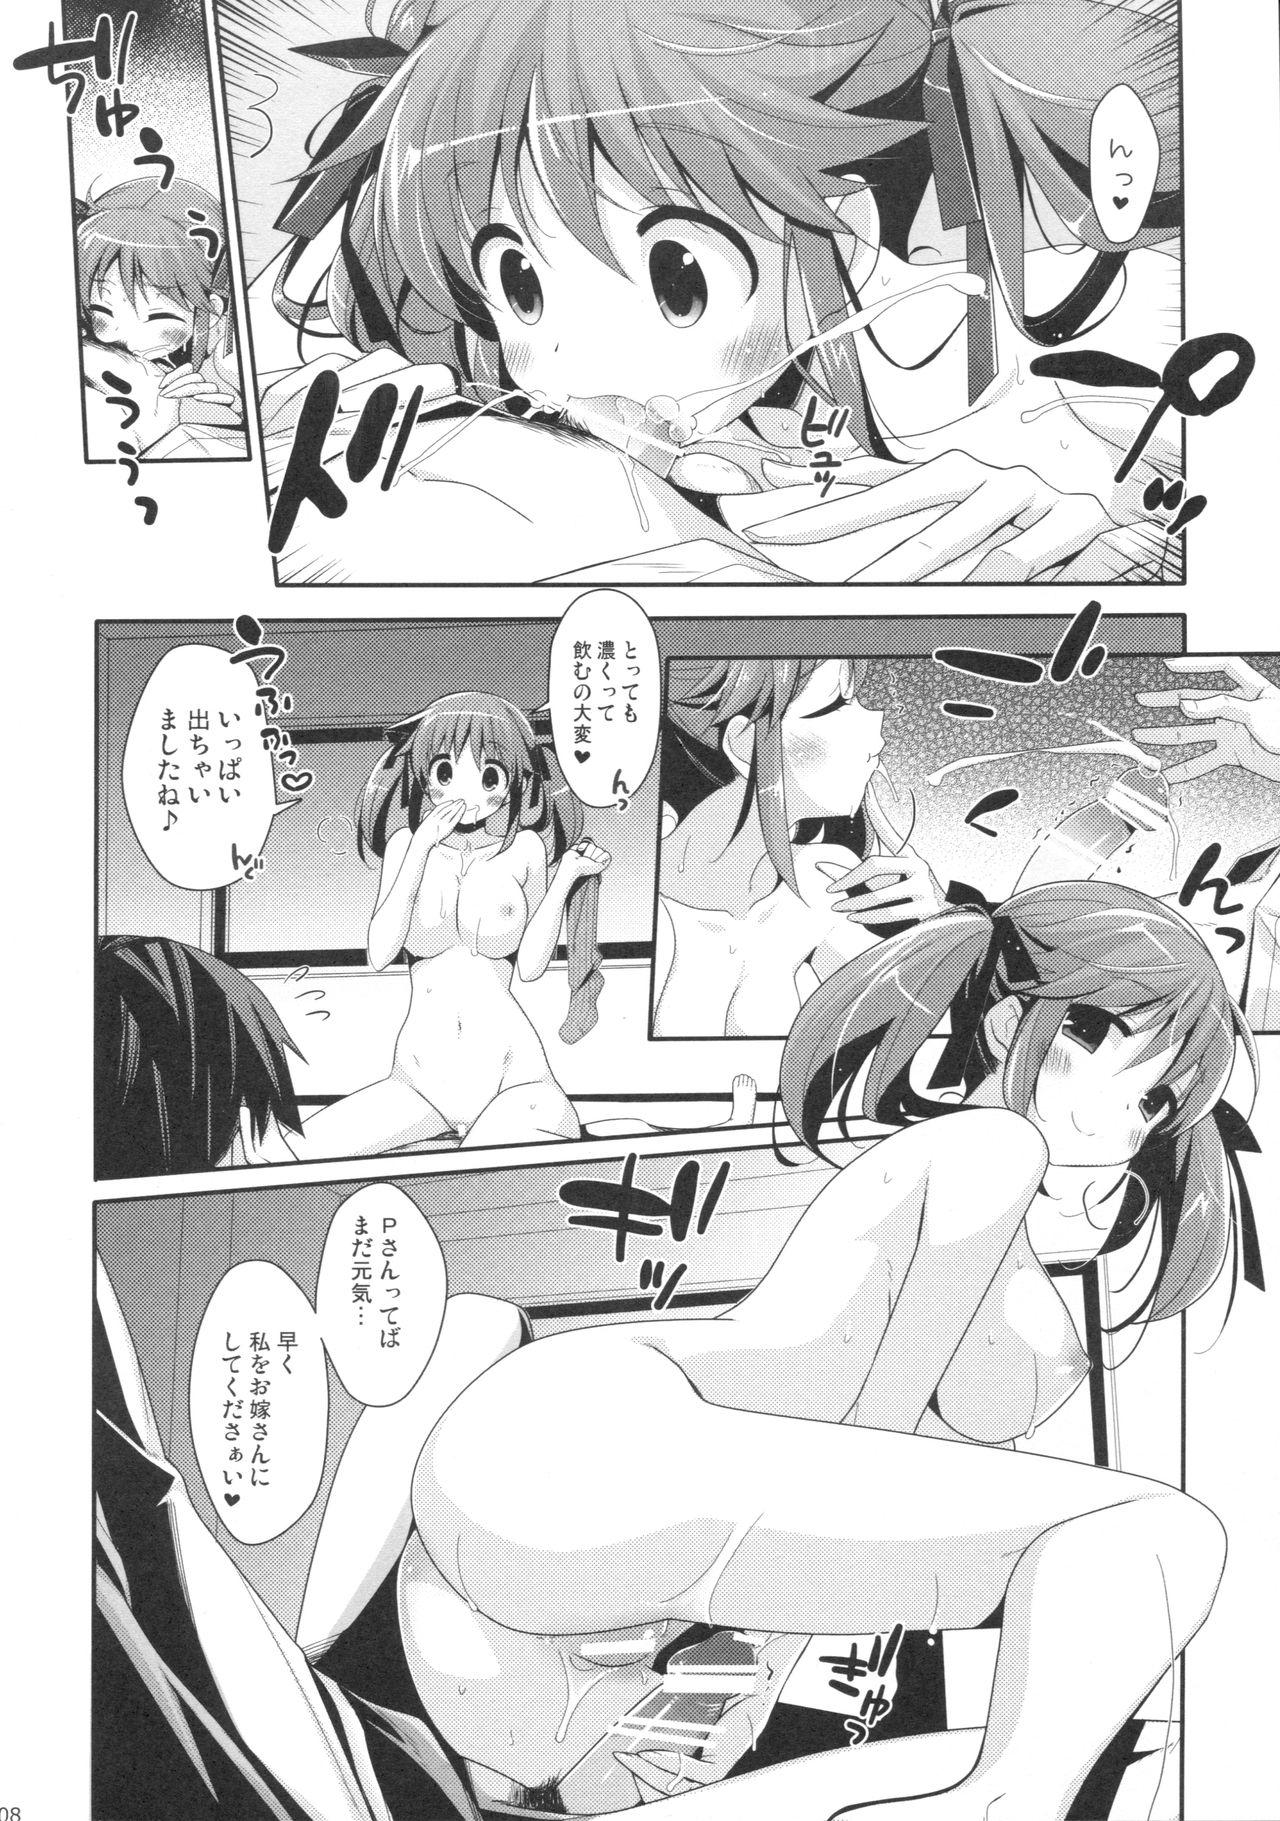 Fodendo ROYAL x SWEET ANNIVERS@RY - The idolmaster Shemale Sex - Page 7